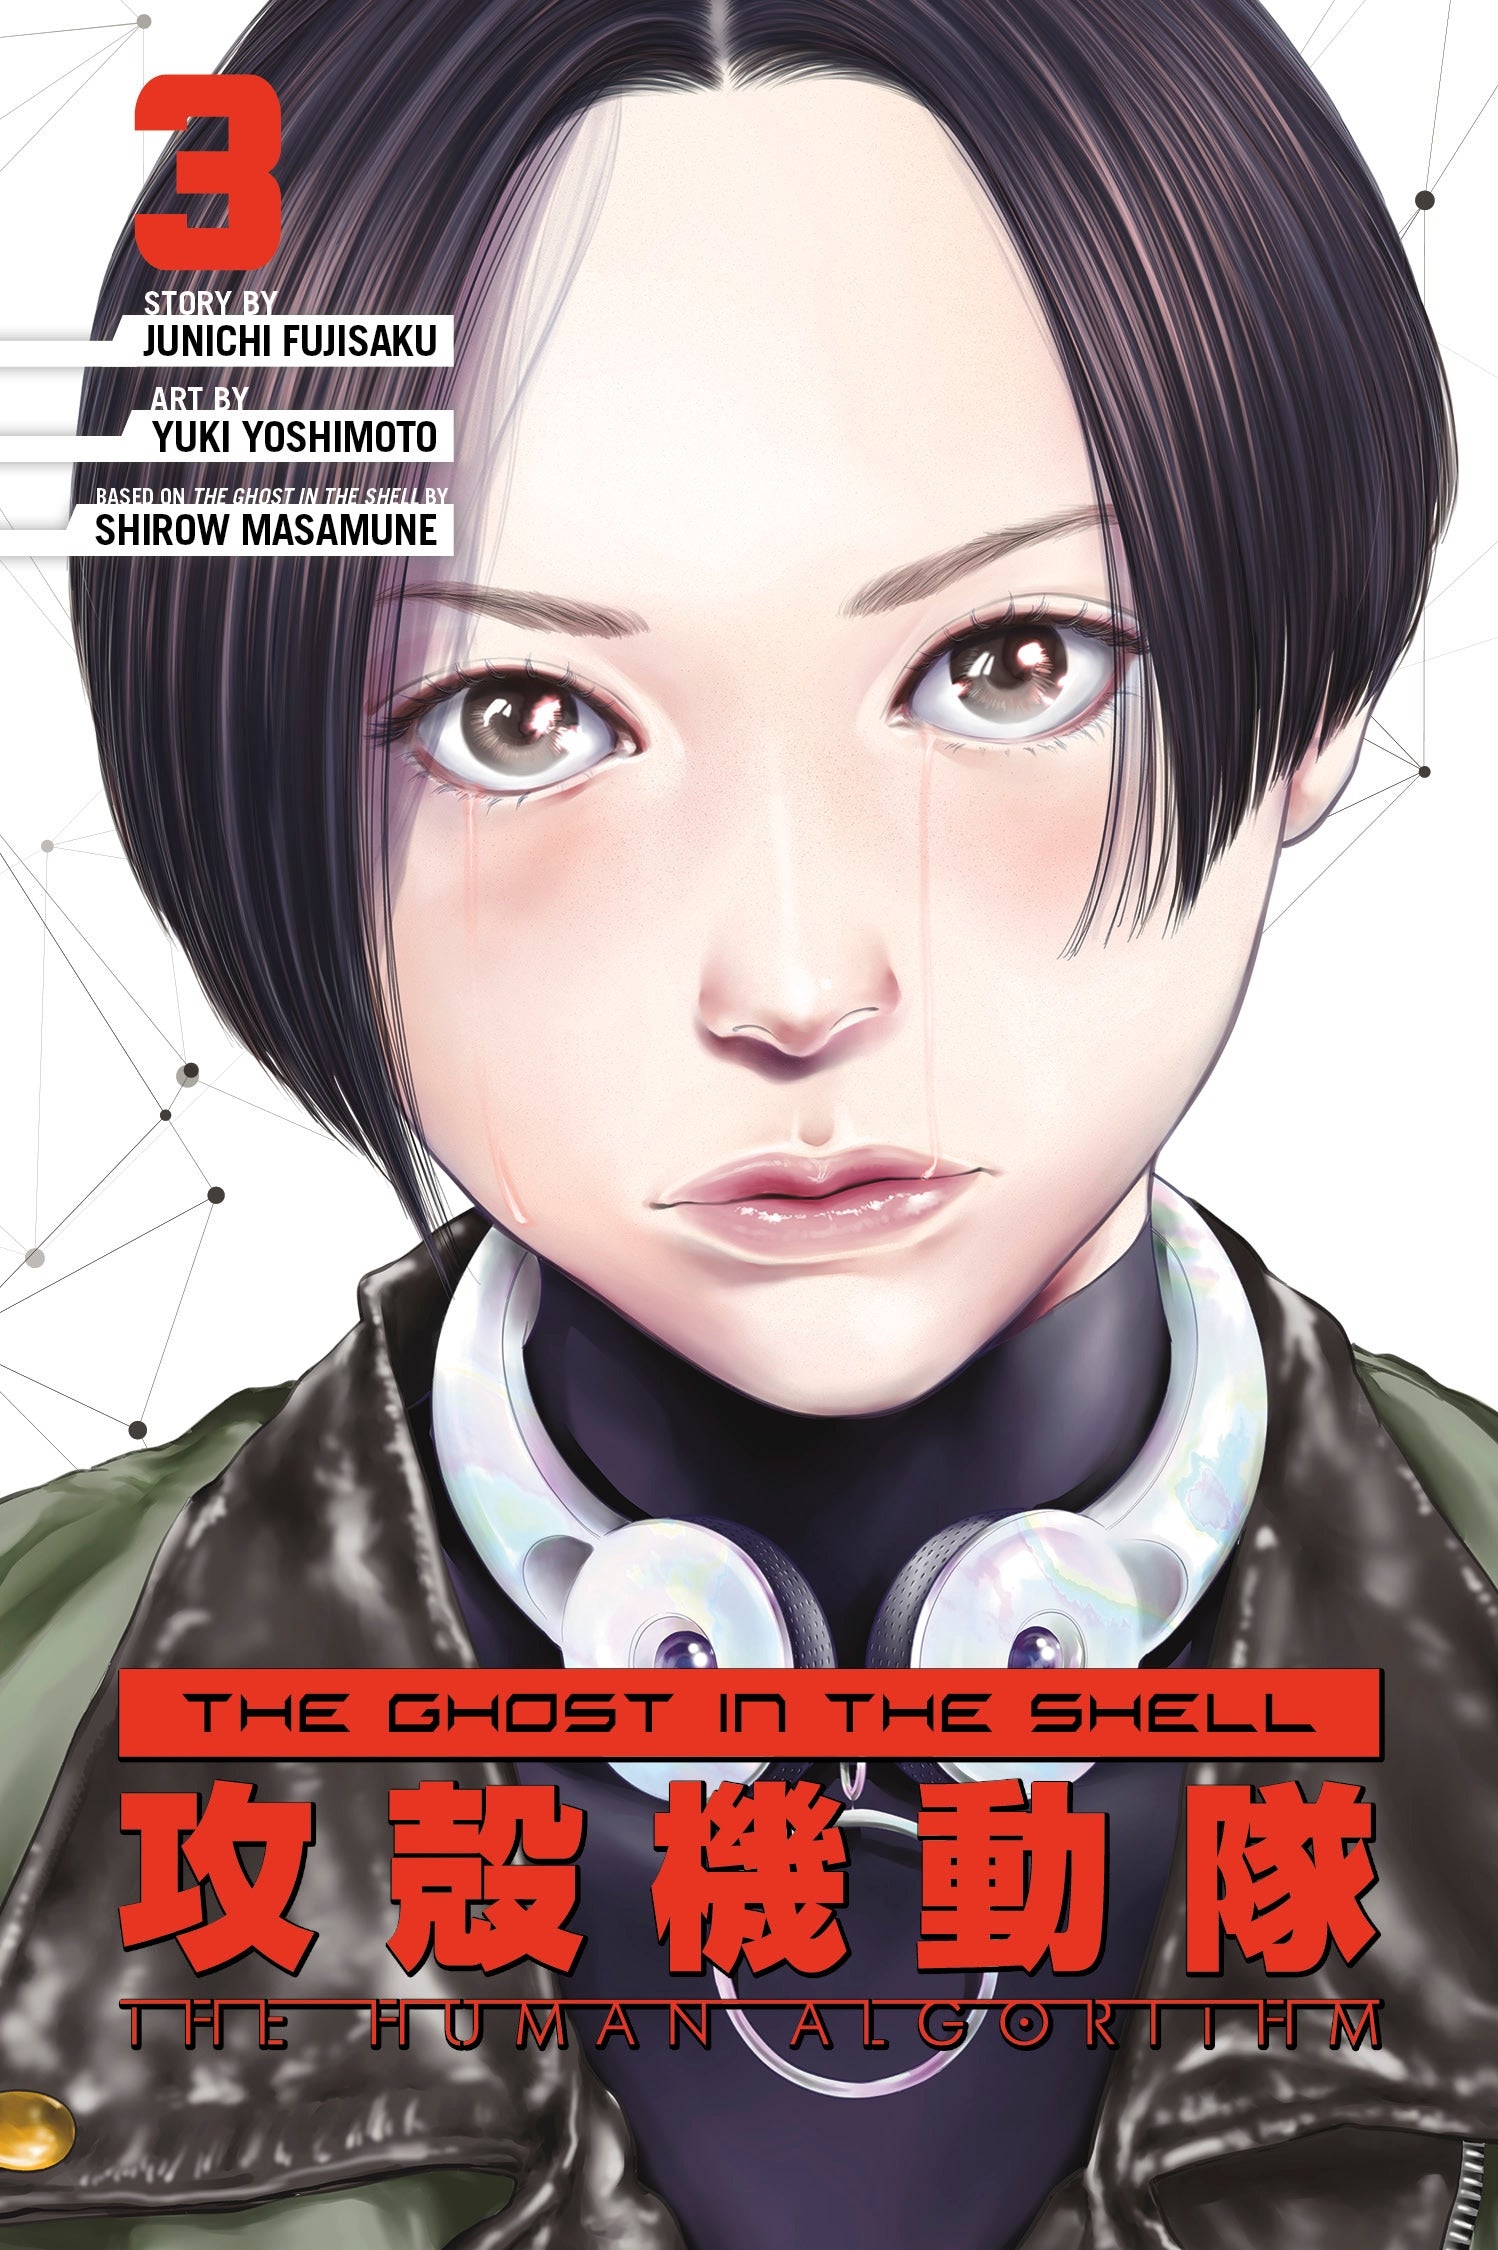 The Ghost in the Shell: The Human Algorithm, Vol. 3